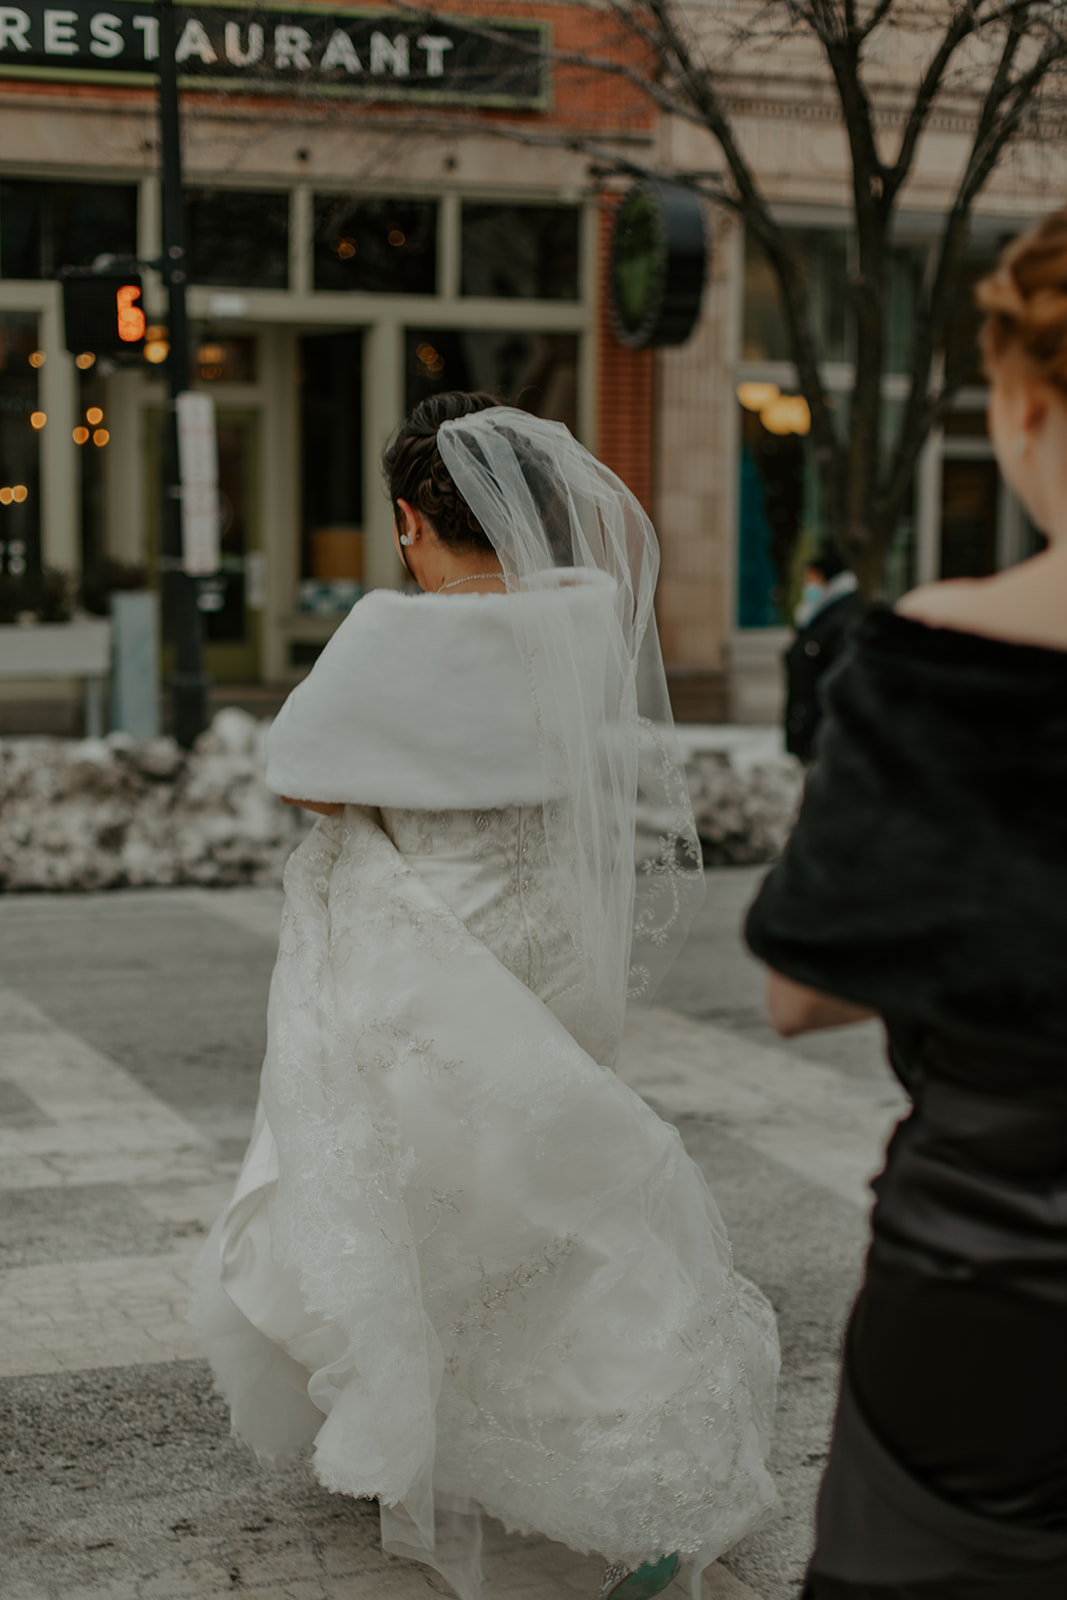 downtown cleveland bride and groom pictures winter wedding photos